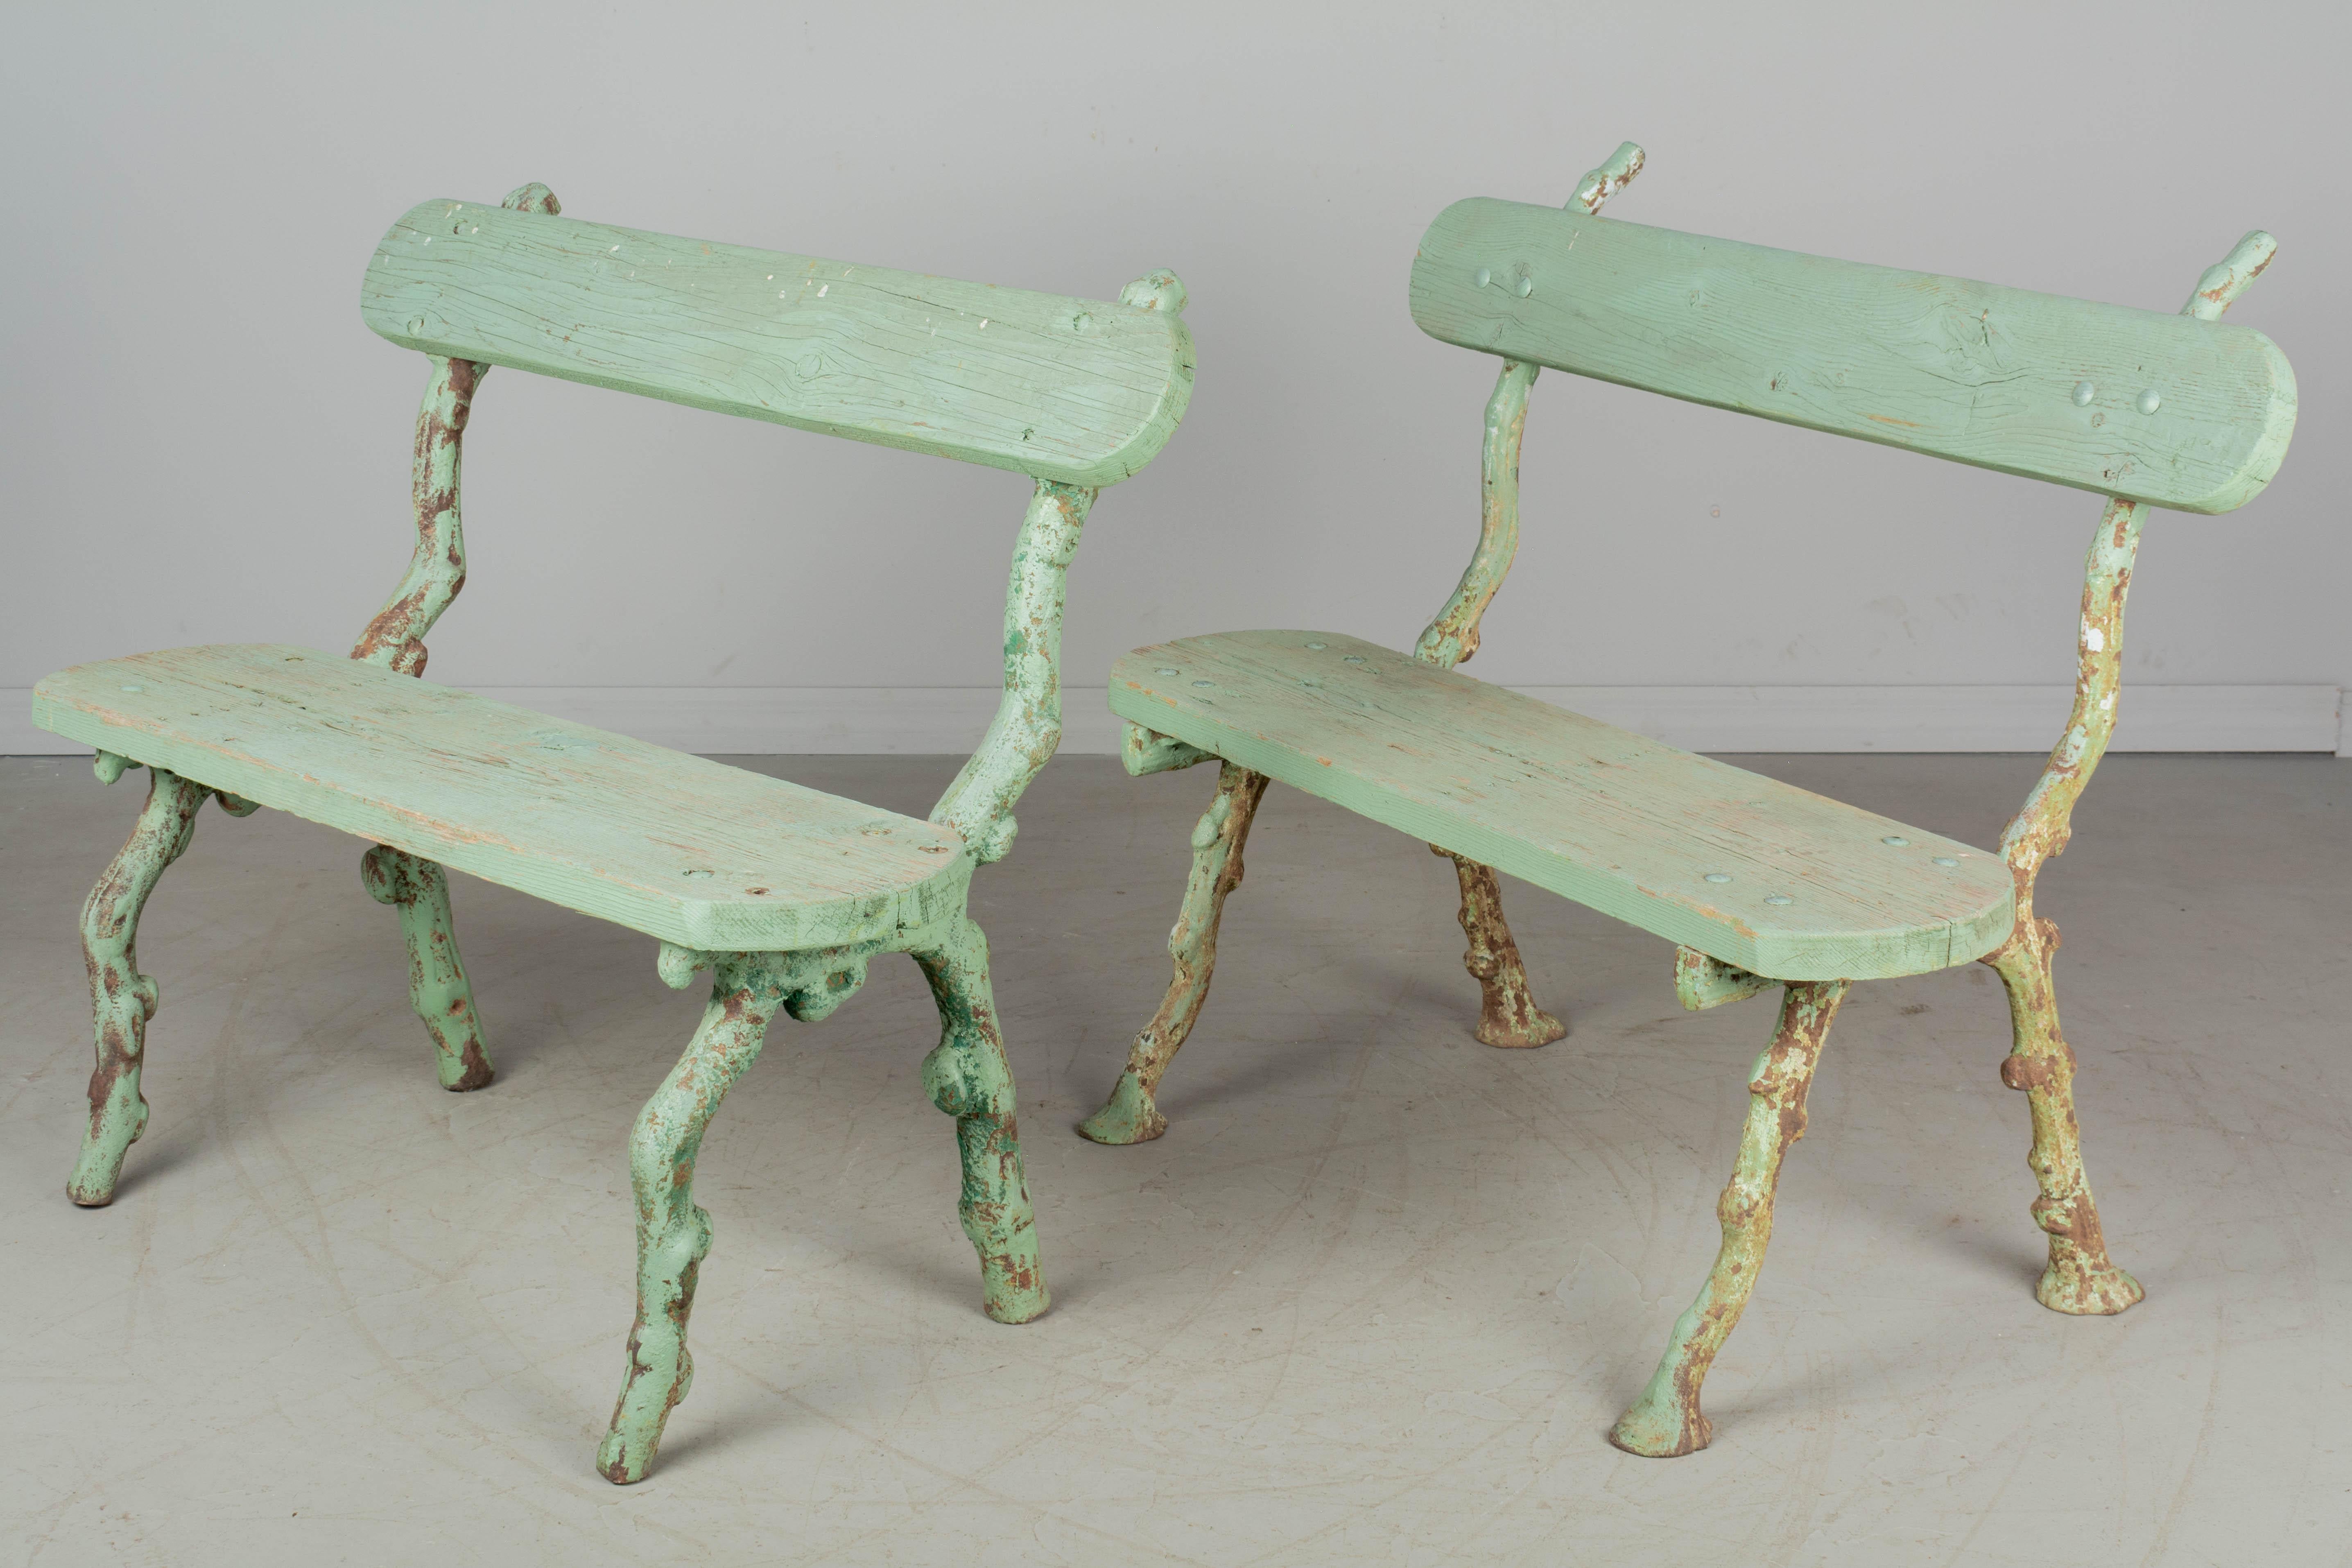 A pair of similar 19th century French garden benches, each with cast iron faux bois frame and oak board seat and backrest. Old pale green painted patina. Nice quality iron work and good sturdy condition. Circa 1870-1890. 
Dimensions: 39